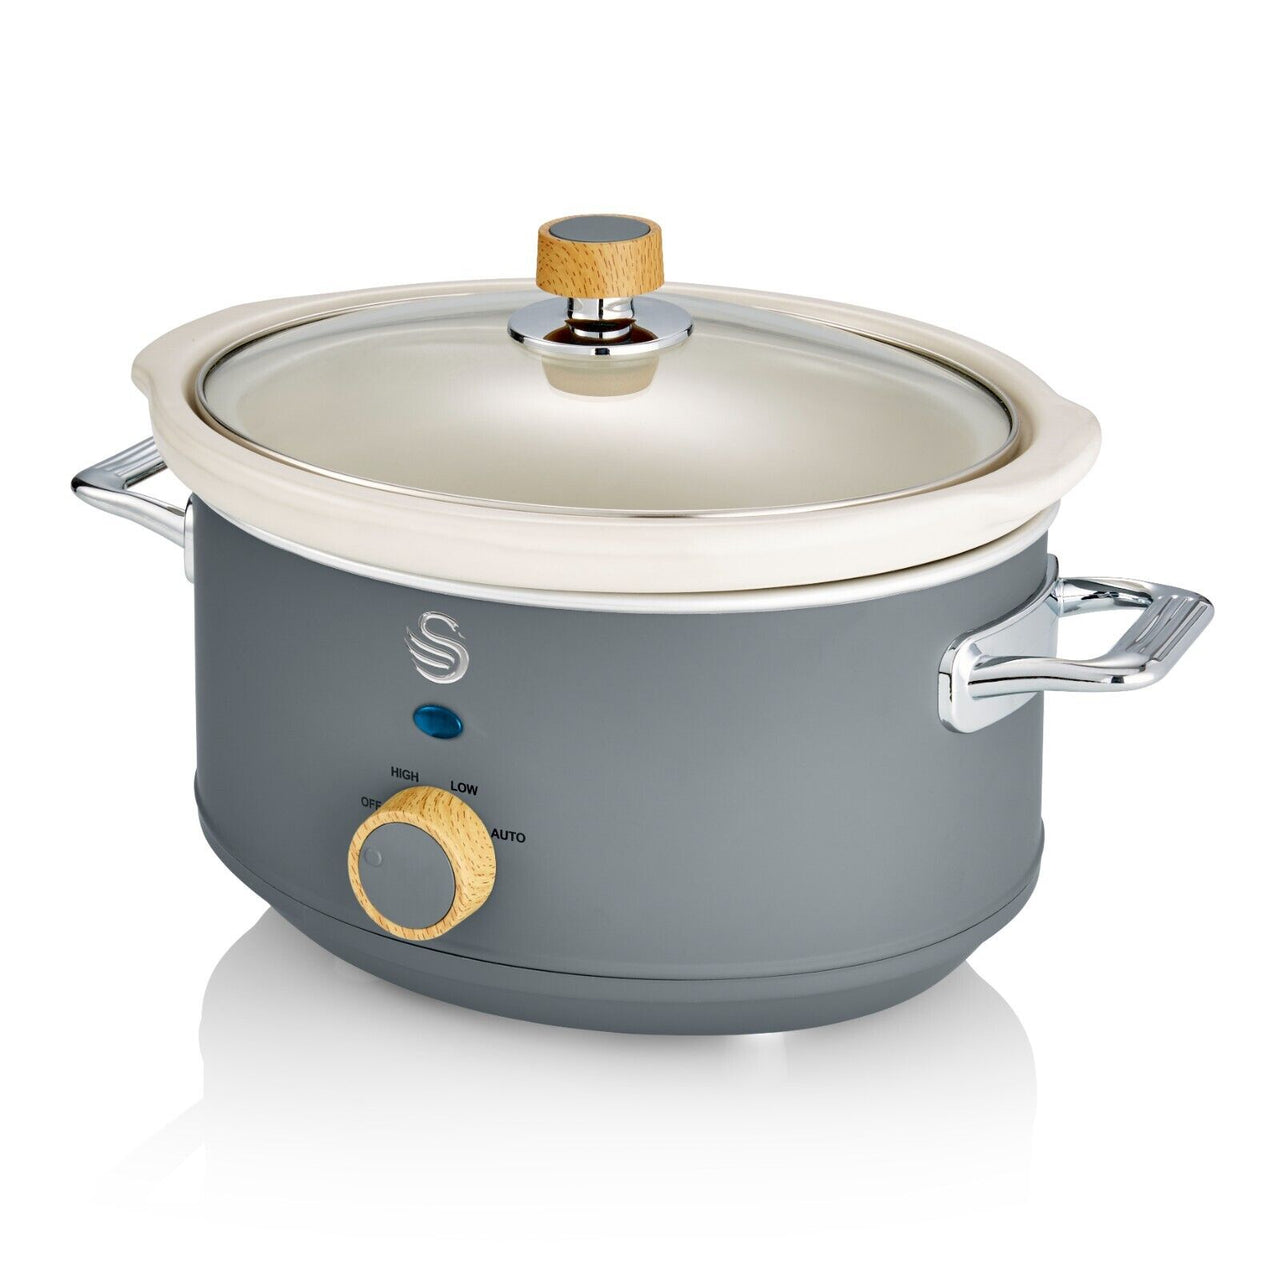 Swan Nordic Grey Slow Cooker Scandi Design Large 3.5L Capacity with 3 Heat Settings